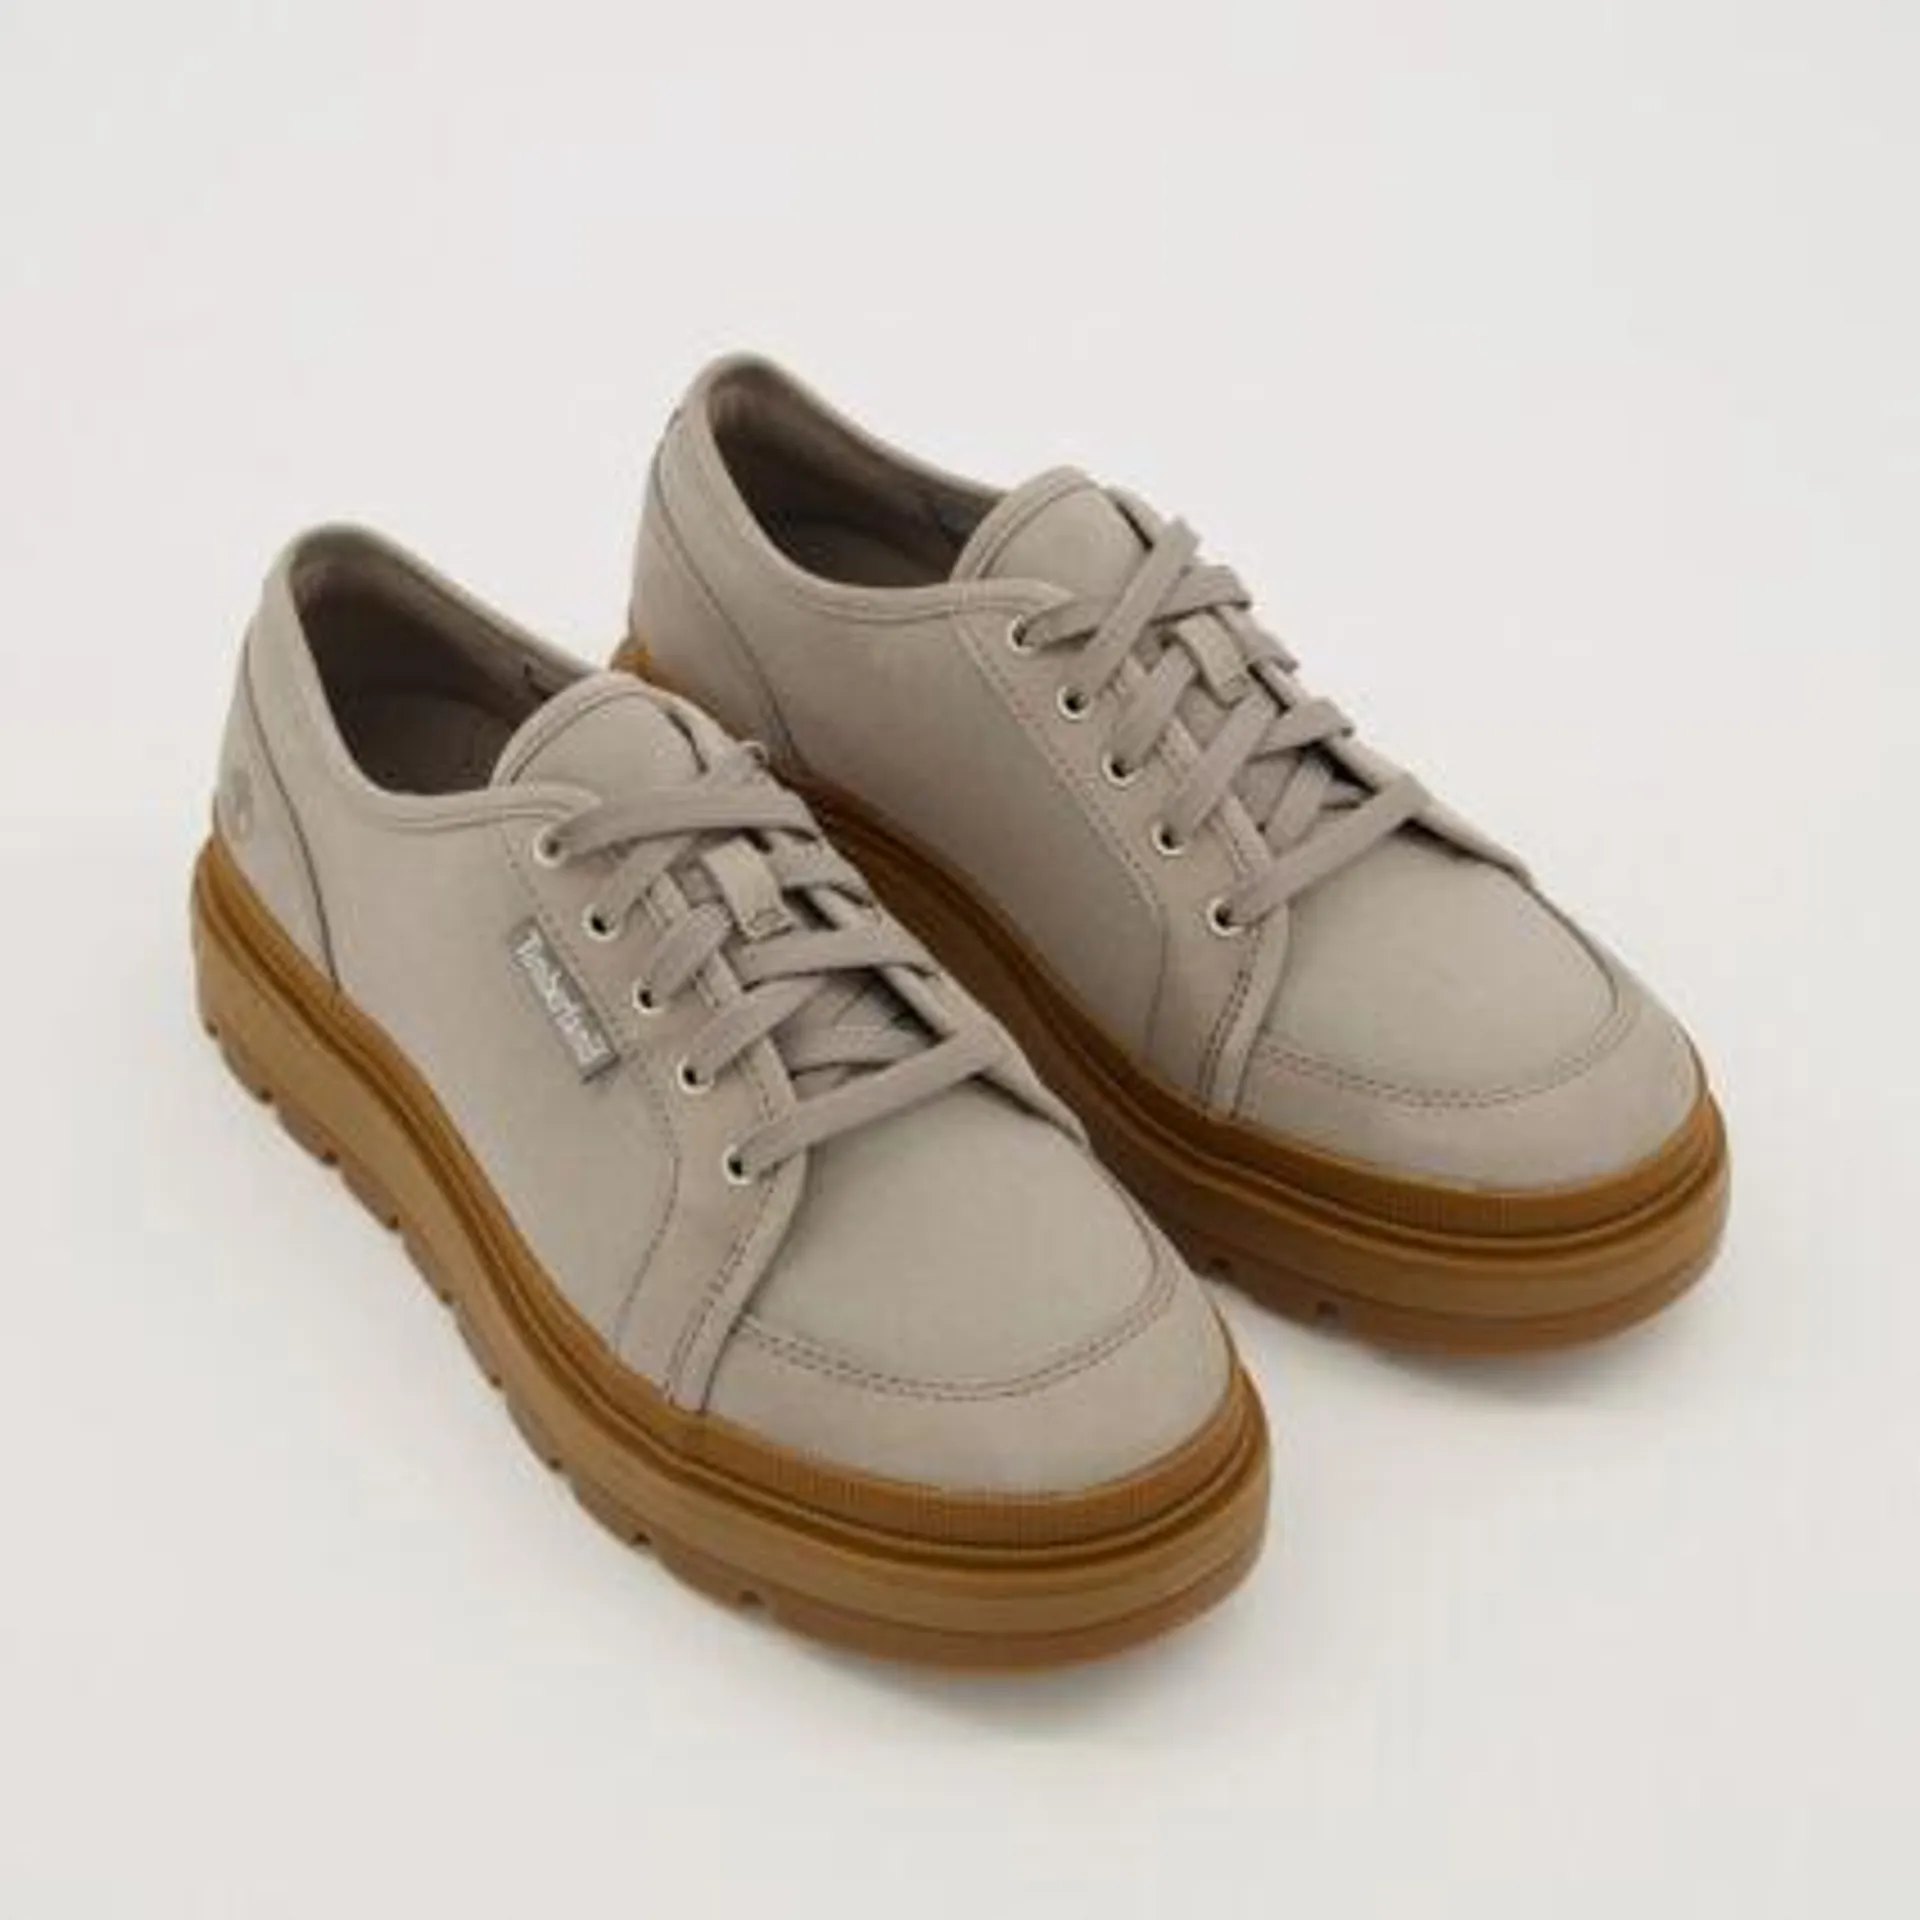 Grey Oxford Canvas Shoes